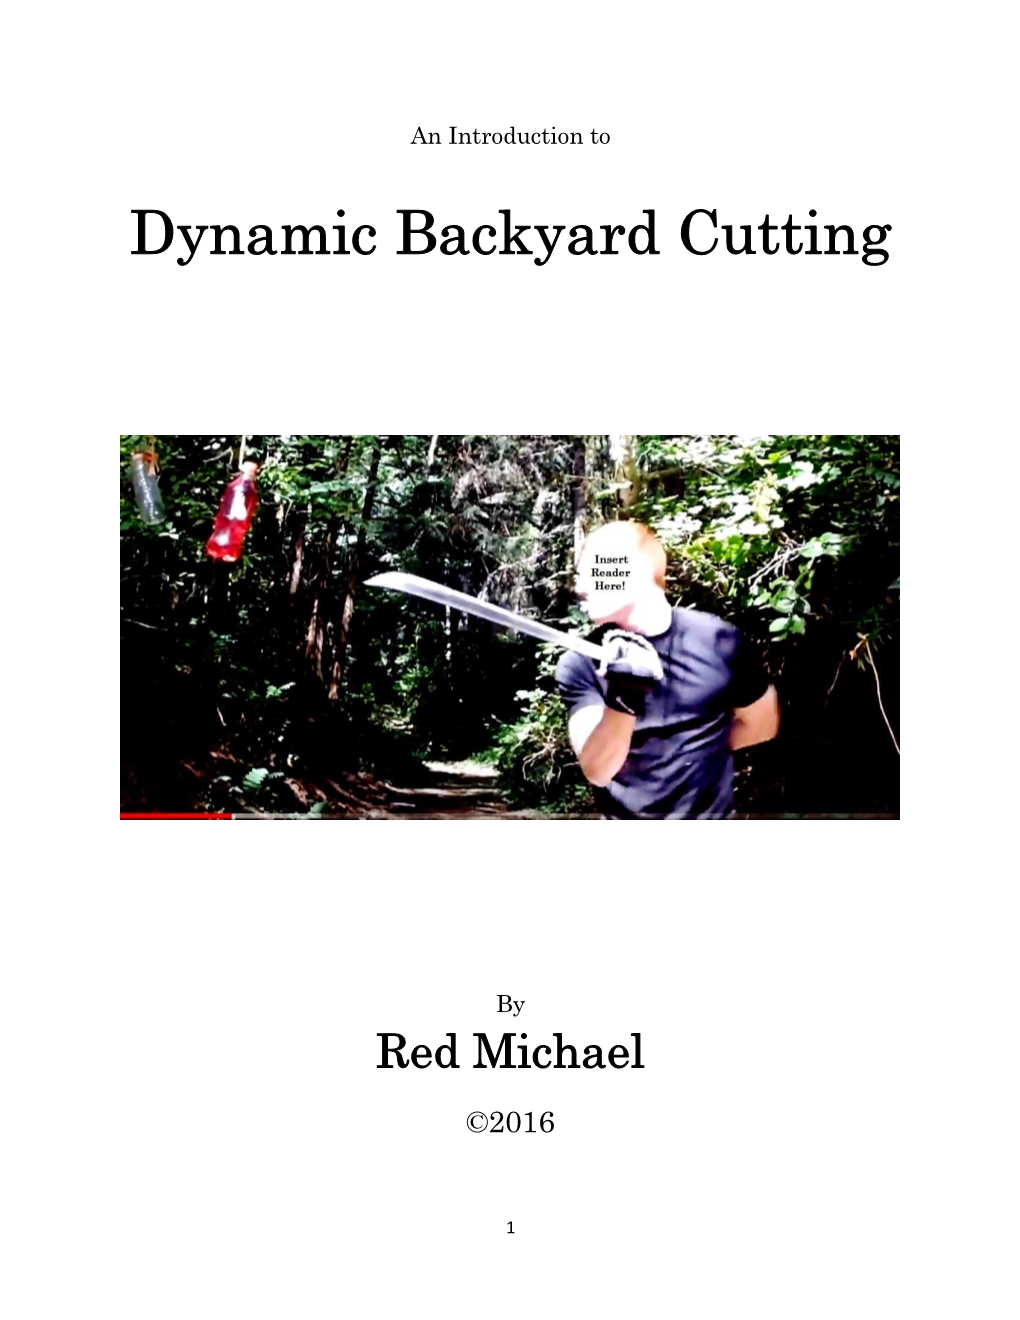 Dynamic Cutting Is to Swords As Casual Target Practice Is to Firearms